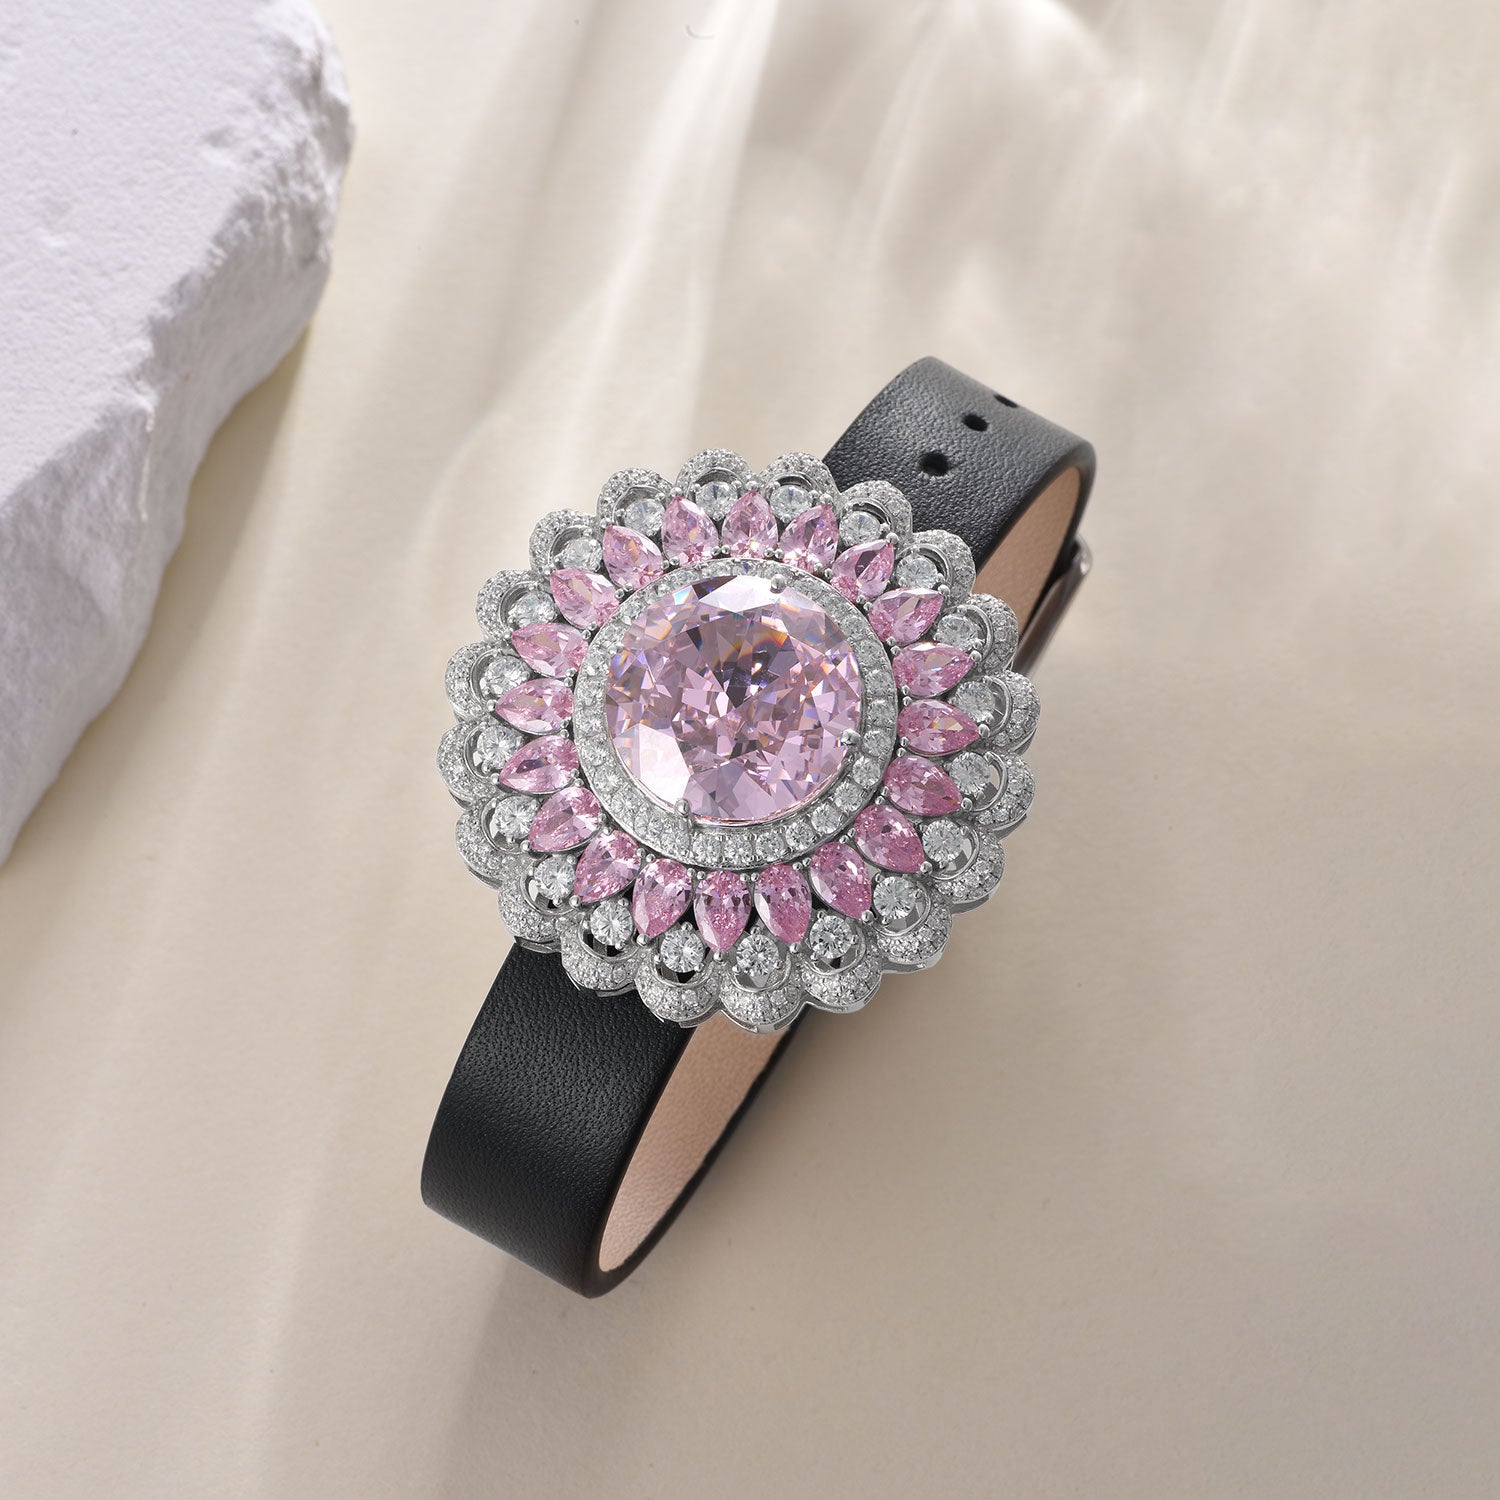 Dissoo® Pink Floral Halo Cluster Brooch/Pin & Leather Bracelet